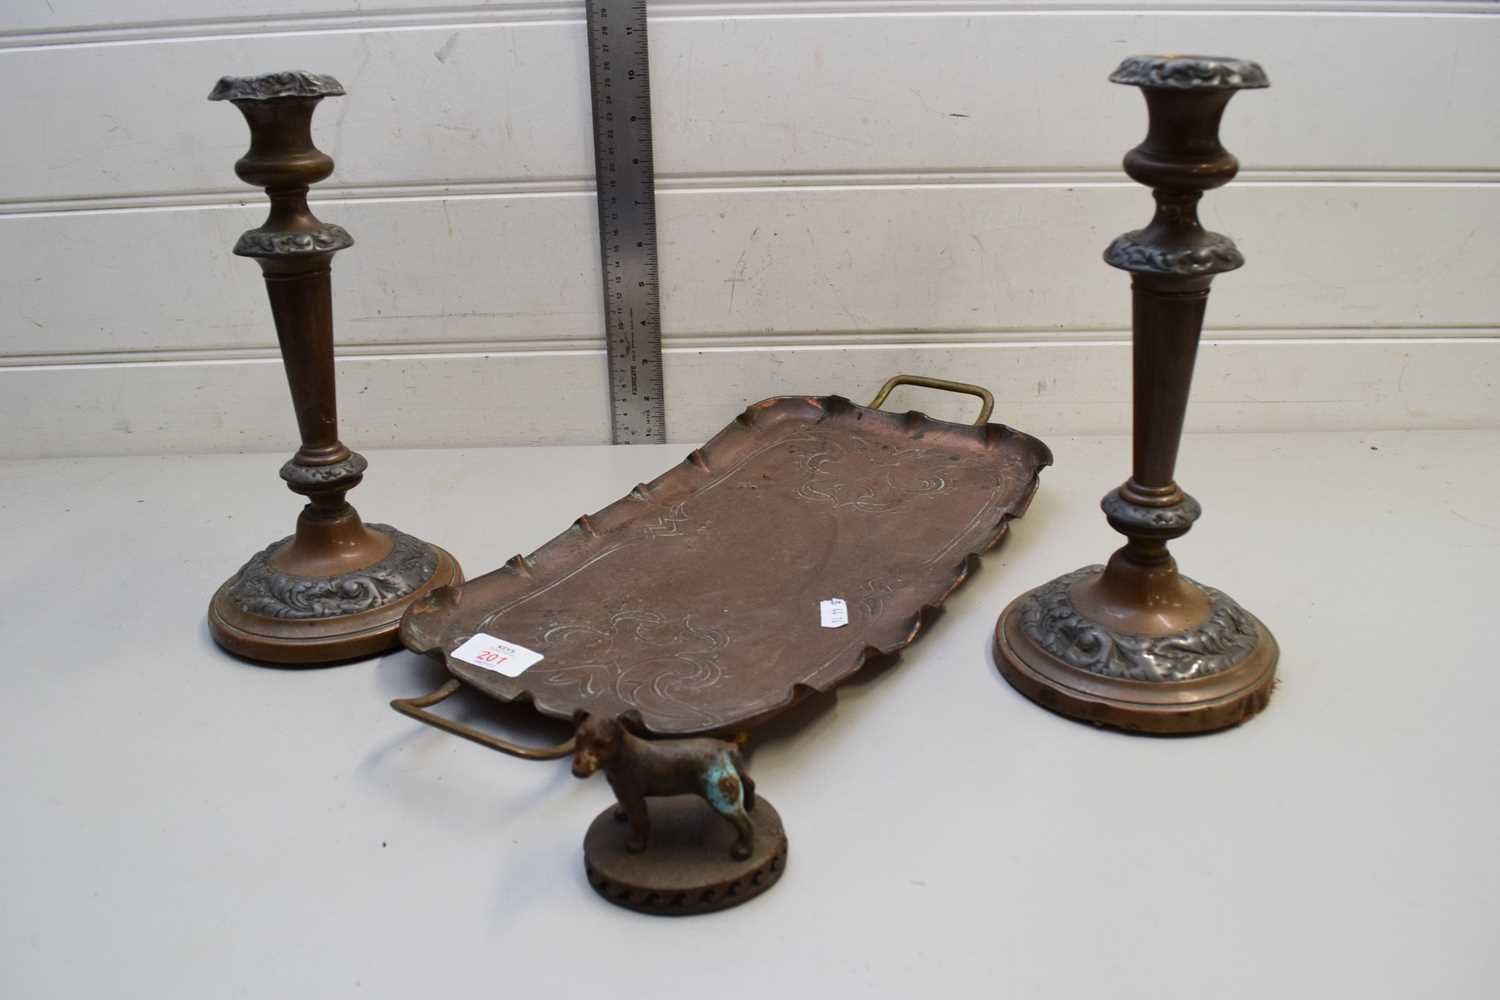 PRESSED COPPER SERVING TRAY TOGETHER WITH A PAIR OF CANDLE STICKS AND A SMALL MODEL DOG (4)